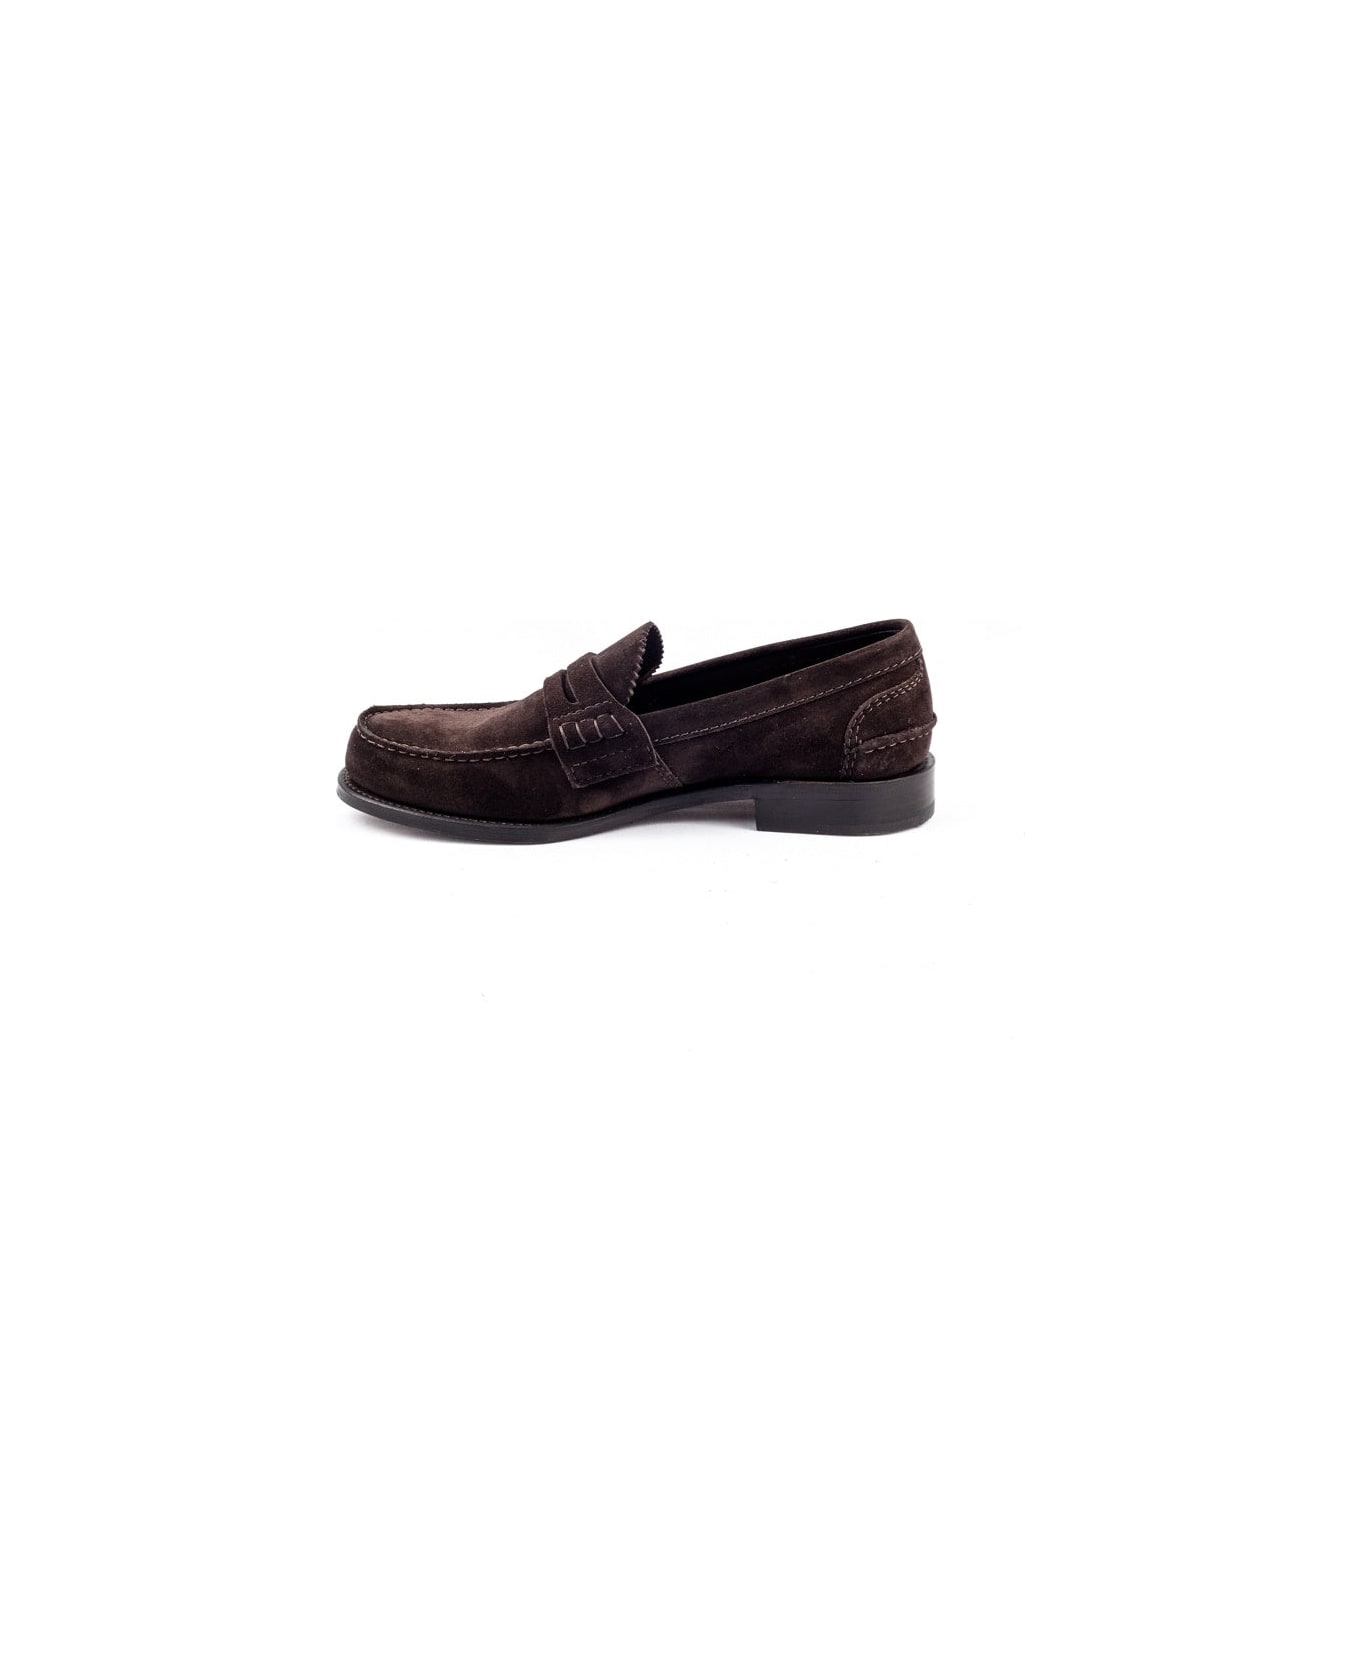 Church's Brown Suede Loafer - Marrone